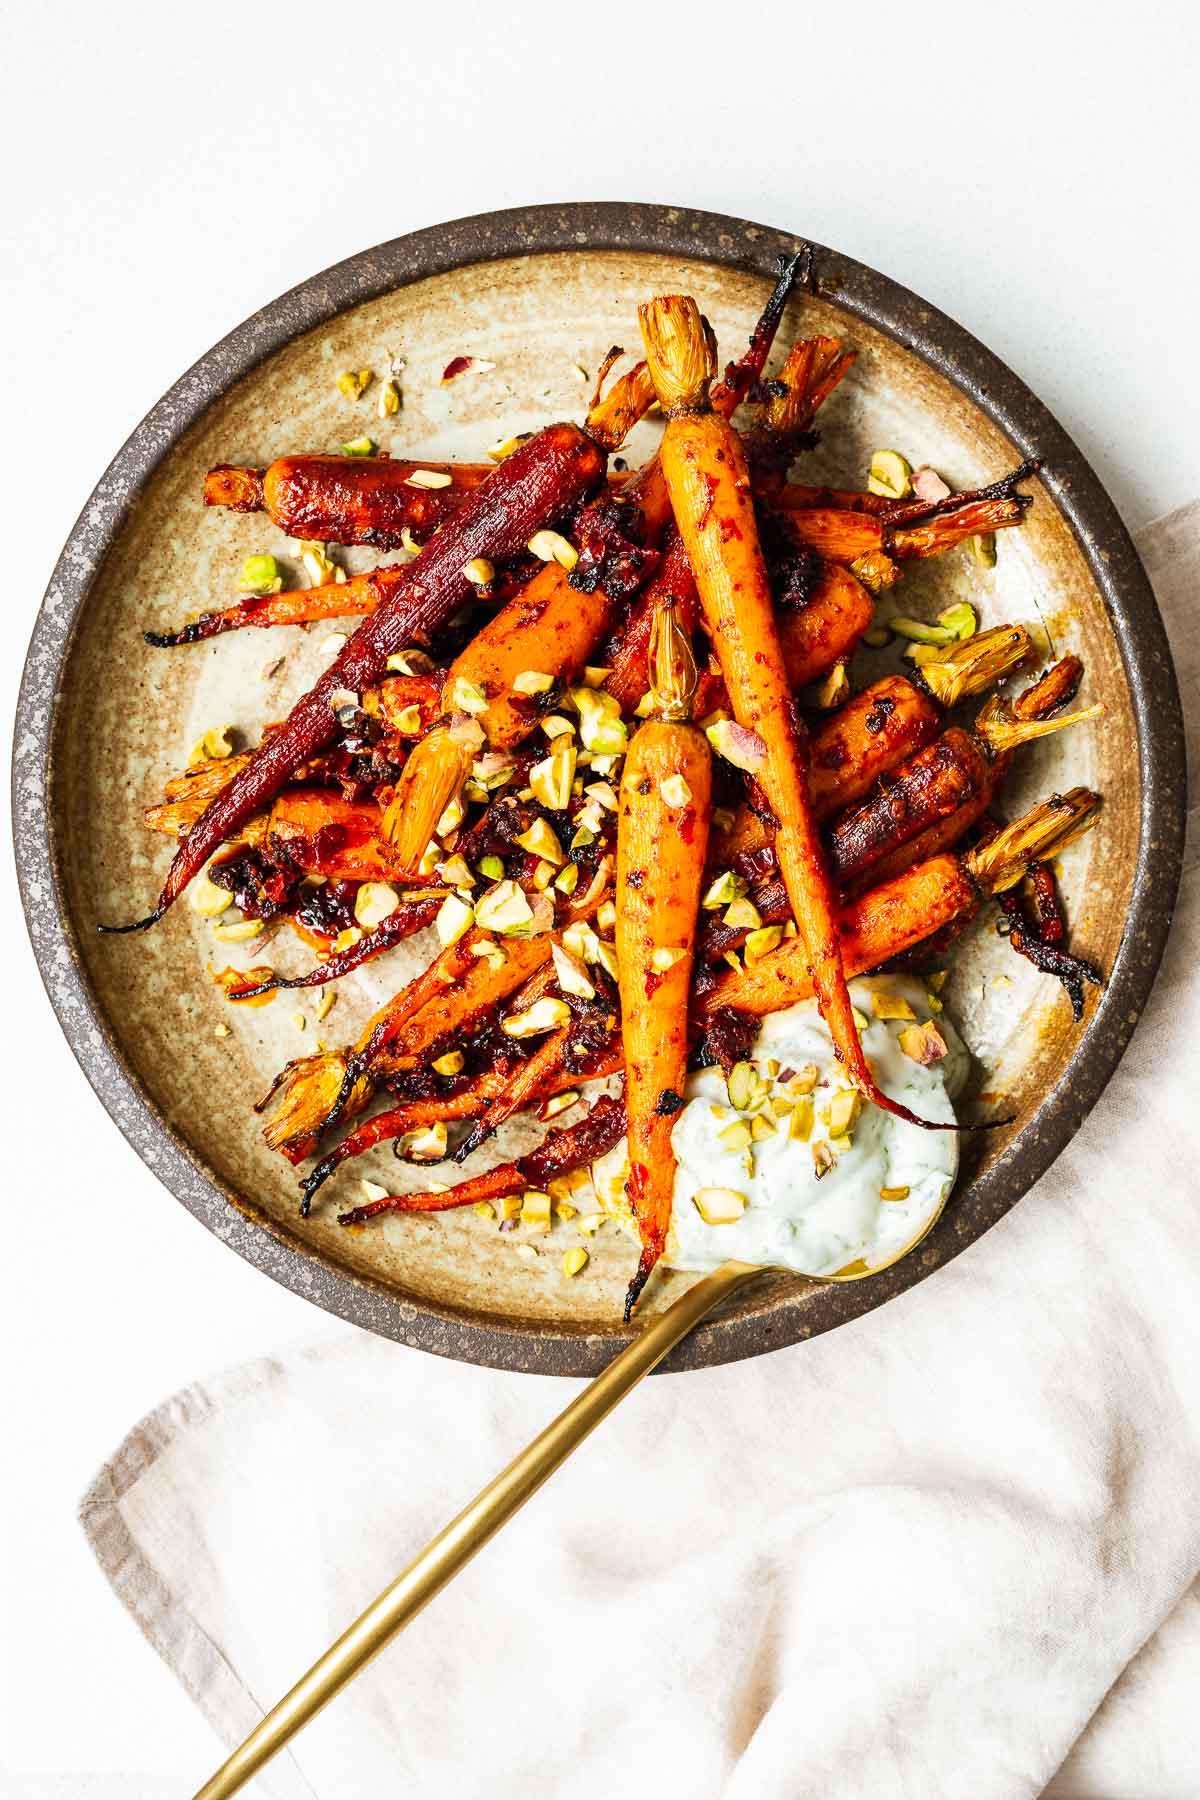 Harissa roasted carrots with chopped pistachios and a dollop of dill yoghurt in a brown ceramic serving plate.